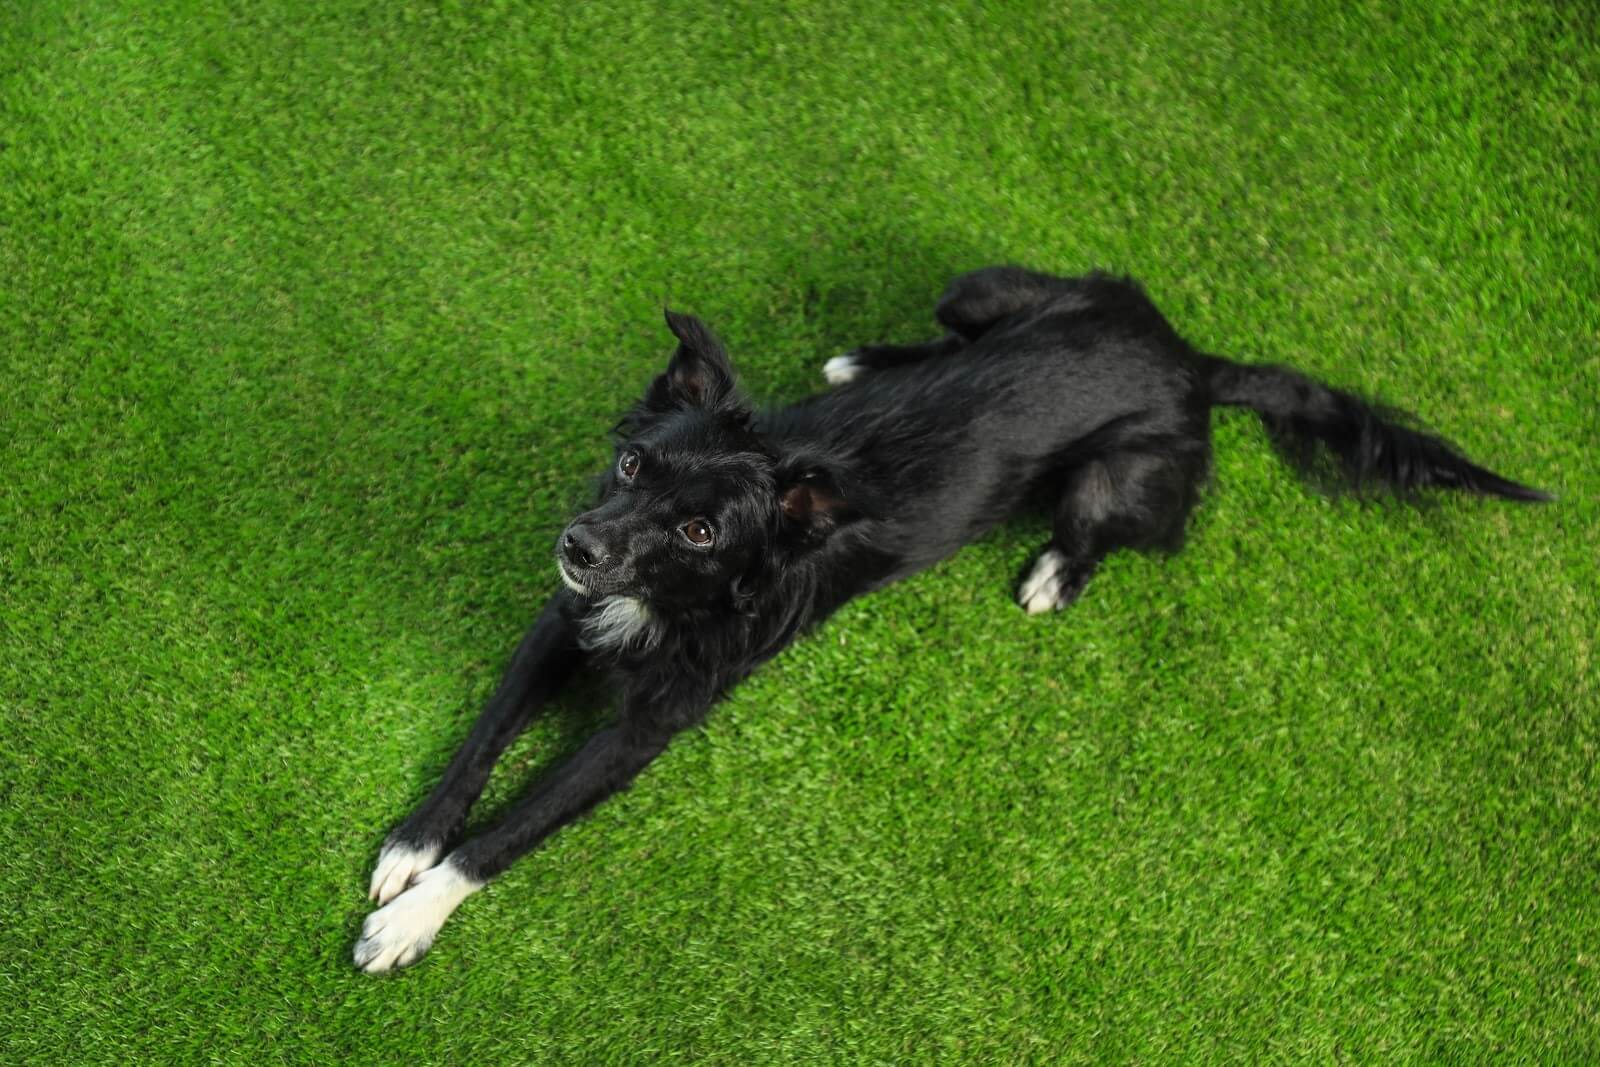 How To Clean Turf Grass For Dogs